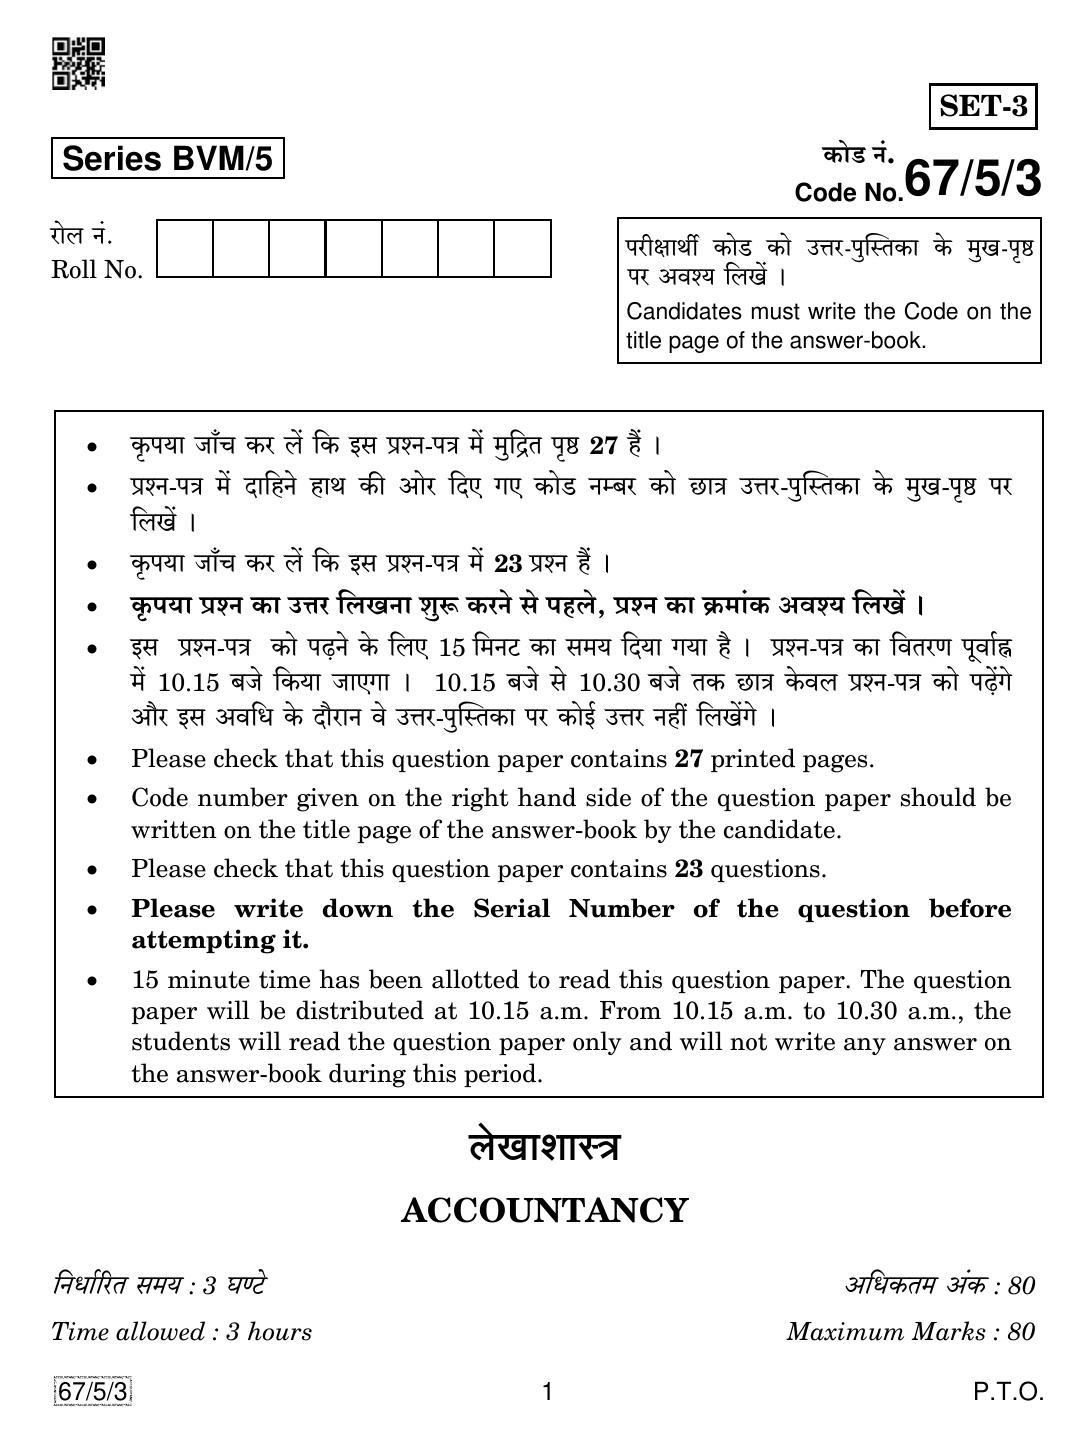 CBSE Class 12 67-5-3 Accountancy 2019 Question Paper - Page 1